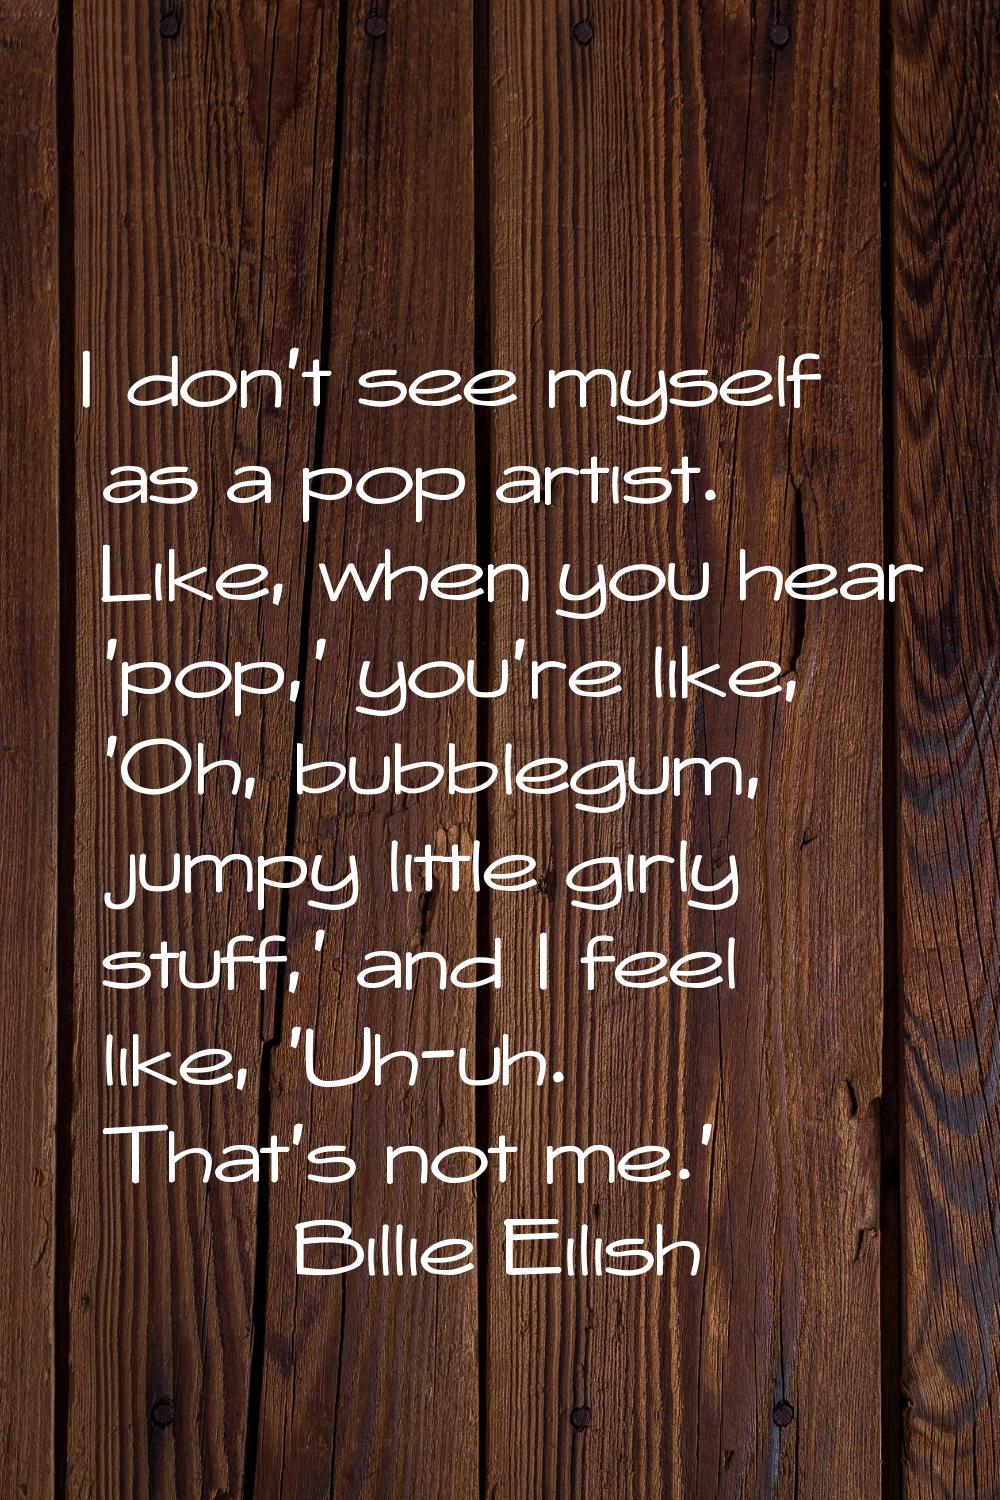 I don't see myself as a pop artist. Like, when you hear 'pop,' you're like, 'Oh, bubblegum, jumpy l